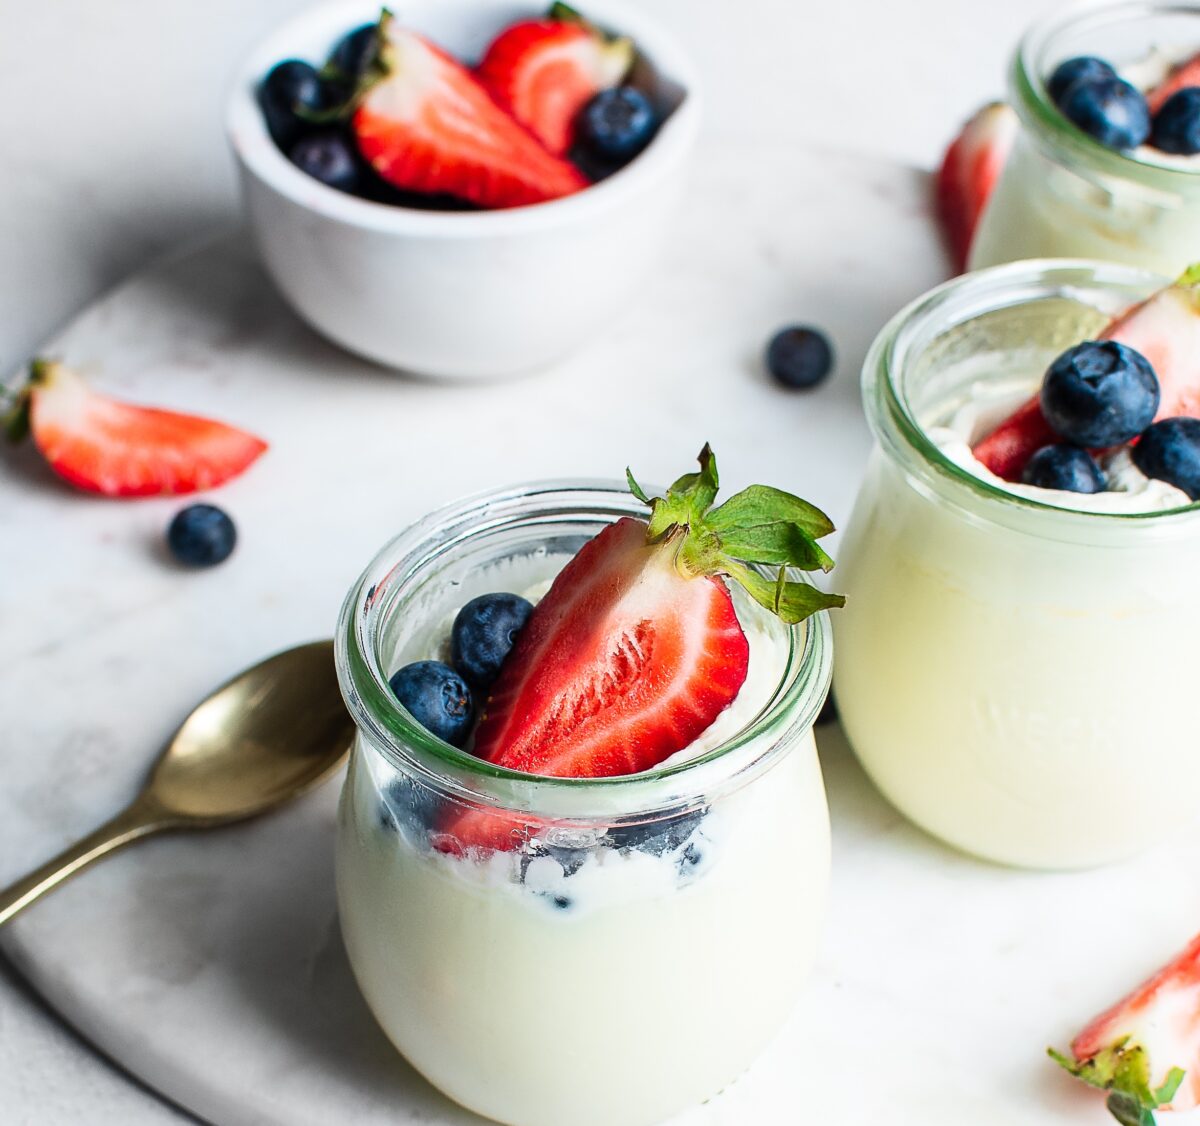 Make this creamy, tangy treat in individual jars and pack them for your picnic.(Jennifer McGruther)